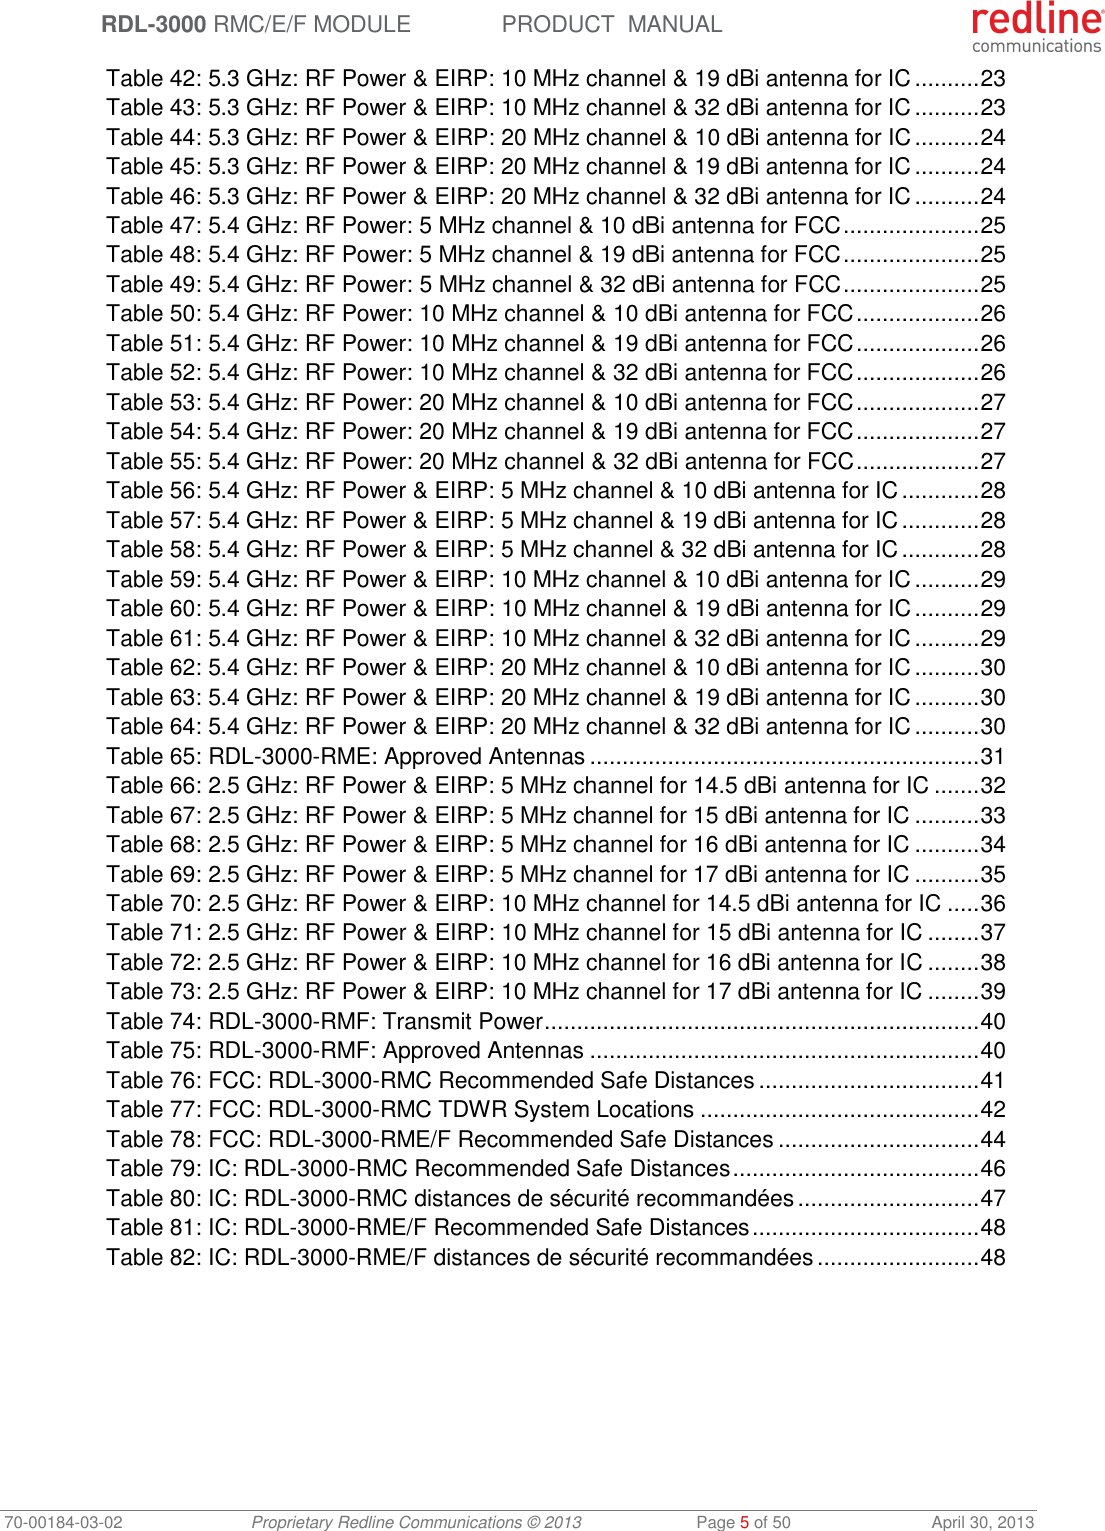  RDL-3000 RMC/E/F MODULE PRODUCT  MANUAL 70-00184-03-02 Proprietary Redline Communications © 2013  Page 5 of 50  April 30, 2013 Table 42: 5.3 GHz: RF Power &amp; EIRP: 10 MHz channel &amp; 19 dBi antenna for IC .......... 23 Table 43: 5.3 GHz: RF Power &amp; EIRP: 10 MHz channel &amp; 32 dBi antenna for IC .......... 23 Table 44: 5.3 GHz: RF Power &amp; EIRP: 20 MHz channel &amp; 10 dBi antenna for IC .......... 24 Table 45: 5.3 GHz: RF Power &amp; EIRP: 20 MHz channel &amp; 19 dBi antenna for IC .......... 24 Table 46: 5.3 GHz: RF Power &amp; EIRP: 20 MHz channel &amp; 32 dBi antenna for IC .......... 24 Table 47: 5.4 GHz: RF Power: 5 MHz channel &amp; 10 dBi antenna for FCC ..................... 25 Table 48: 5.4 GHz: RF Power: 5 MHz channel &amp; 19 dBi antenna for FCC ..................... 25 Table 49: 5.4 GHz: RF Power: 5 MHz channel &amp; 32 dBi antenna for FCC ..................... 25 Table 50: 5.4 GHz: RF Power: 10 MHz channel &amp; 10 dBi antenna for FCC ................... 26 Table 51: 5.4 GHz: RF Power: 10 MHz channel &amp; 19 dBi antenna for FCC ................... 26 Table 52: 5.4 GHz: RF Power: 10 MHz channel &amp; 32 dBi antenna for FCC ................... 26 Table 53: 5.4 GHz: RF Power: 20 MHz channel &amp; 10 dBi antenna for FCC ................... 27 Table 54: 5.4 GHz: RF Power: 20 MHz channel &amp; 19 dBi antenna for FCC ................... 27 Table 55: 5.4 GHz: RF Power: 20 MHz channel &amp; 32 dBi antenna for FCC ................... 27 Table 56: 5.4 GHz: RF Power &amp; EIRP: 5 MHz channel &amp; 10 dBi antenna for IC ............ 28 Table 57: 5.4 GHz: RF Power &amp; EIRP: 5 MHz channel &amp; 19 dBi antenna for IC ............ 28 Table 58: 5.4 GHz: RF Power &amp; EIRP: 5 MHz channel &amp; 32 dBi antenna for IC ............ 28 Table 59: 5.4 GHz: RF Power &amp; EIRP: 10 MHz channel &amp; 10 dBi antenna for IC .......... 29 Table 60: 5.4 GHz: RF Power &amp; EIRP: 10 MHz channel &amp; 19 dBi antenna for IC .......... 29 Table 61: 5.4 GHz: RF Power &amp; EIRP: 10 MHz channel &amp; 32 dBi antenna for IC .......... 29 Table 62: 5.4 GHz: RF Power &amp; EIRP: 20 MHz channel &amp; 10 dBi antenna for IC .......... 30 Table 63: 5.4 GHz: RF Power &amp; EIRP: 20 MHz channel &amp; 19 dBi antenna for IC .......... 30 Table 64: 5.4 GHz: RF Power &amp; EIRP: 20 MHz channel &amp; 32 dBi antenna for IC .......... 30 Table 65: RDL-3000-RME: Approved Antennas ............................................................ 31 Table 66: 2.5 GHz: RF Power &amp; EIRP: 5 MHz channel for 14.5 dBi antenna for IC ....... 32 Table 67: 2.5 GHz: RF Power &amp; EIRP: 5 MHz channel for 15 dBi antenna for IC .......... 33 Table 68: 2.5 GHz: RF Power &amp; EIRP: 5 MHz channel for 16 dBi antenna for IC .......... 34 Table 69: 2.5 GHz: RF Power &amp; EIRP: 5 MHz channel for 17 dBi antenna for IC .......... 35 Table 70: 2.5 GHz: RF Power &amp; EIRP: 10 MHz channel for 14.5 dBi antenna for IC ..... 36 Table 71: 2.5 GHz: RF Power &amp; EIRP: 10 MHz channel for 15 dBi antenna for IC ........ 37 Table 72: 2.5 GHz: RF Power &amp; EIRP: 10 MHz channel for 16 dBi antenna for IC ........ 38 Table 73: 2.5 GHz: RF Power &amp; EIRP: 10 MHz channel for 17 dBi antenna for IC ........ 39 Table 74: RDL-3000-RMF: Transmit Power ................................................................... 40 Table 75: RDL-3000-RMF: Approved Antennas ............................................................ 40 Table 76: FCC: RDL-3000-RMC Recommended Safe Distances .................................. 41 Table 77: FCC: RDL-3000-RMC TDWR System Locations ........................................... 42 Table 78: FCC: RDL-3000-RME/F Recommended Safe Distances ............................... 44 Table 79: IC: RDL-3000-RMC Recommended Safe Distances ...................................... 46 Table 80: IC: RDL-3000-RMC distances de sécurité recommandées ............................ 47 Table 81: IC: RDL-3000-RME/F Recommended Safe Distances ................................... 48 Table 82: IC: RDL-3000-RME/F distances de sécurité recommandées ......................... 48 